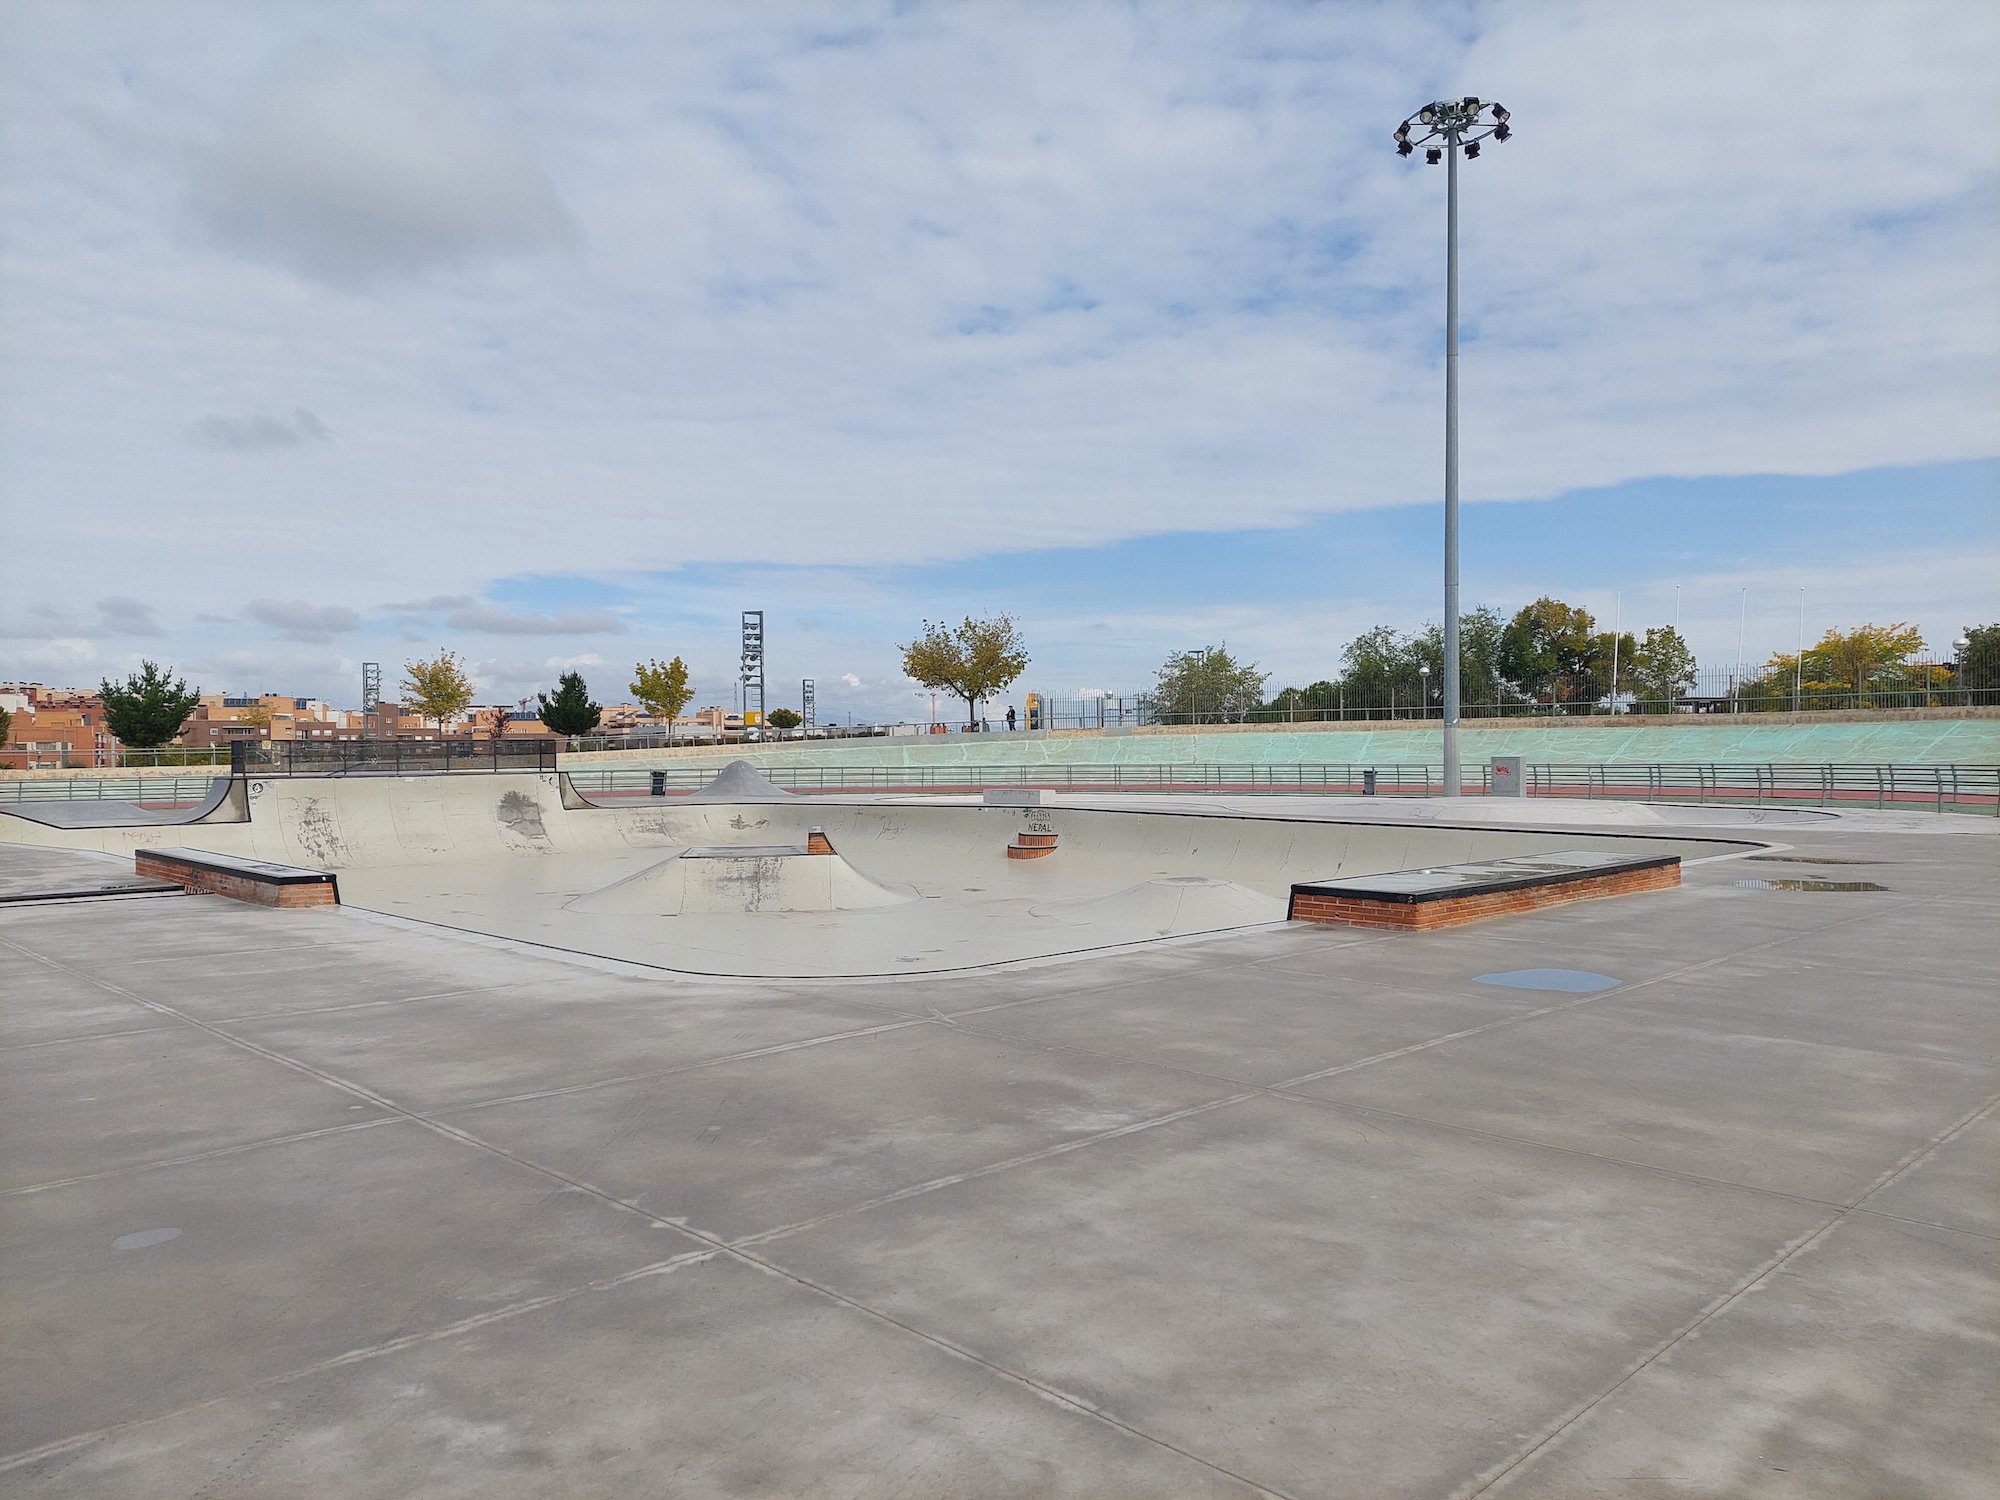 10 best skateparks in Spain - Discover what spots are bucket list travel destinations